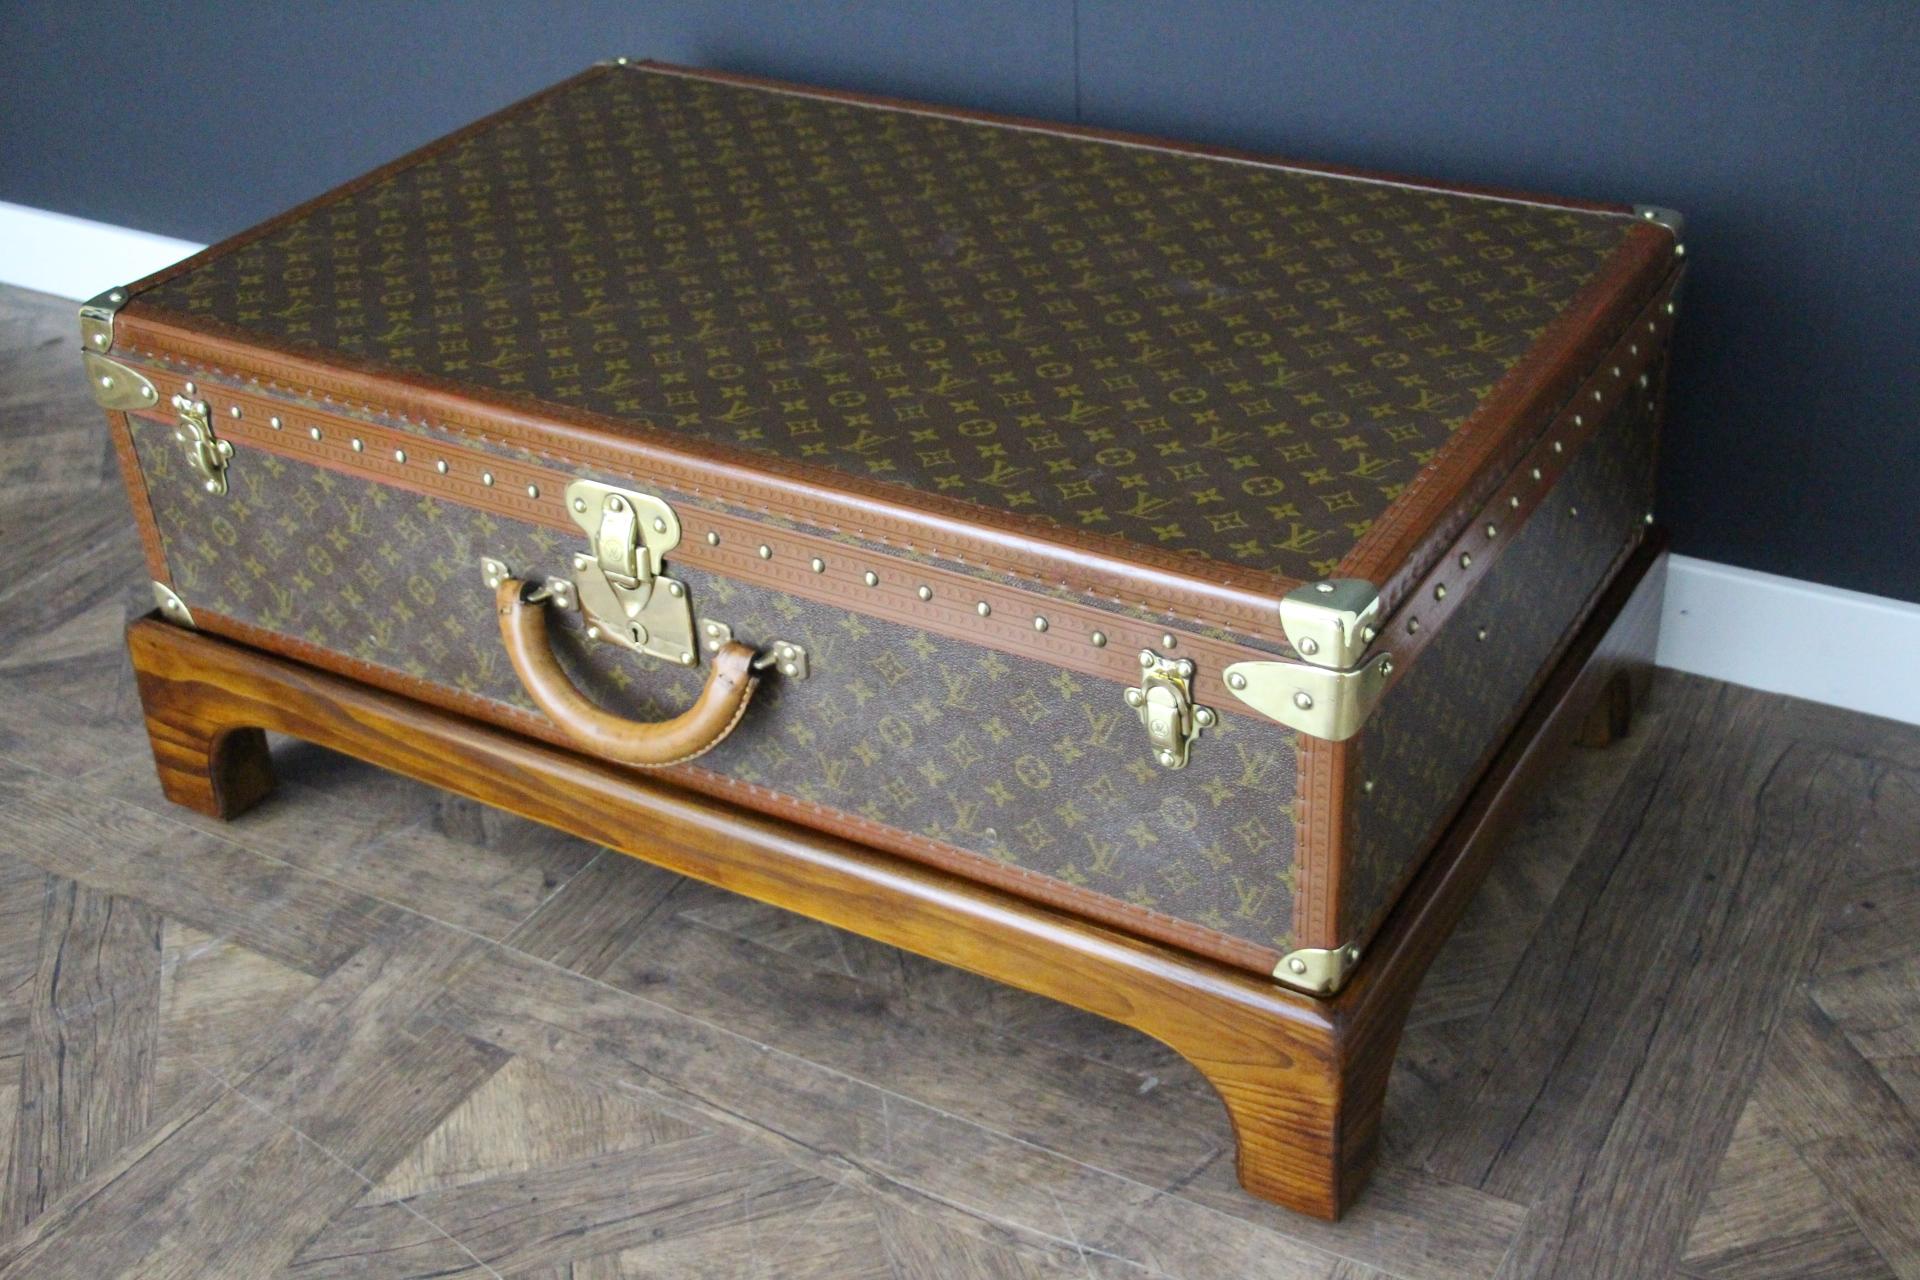 Magnificent Louis Vuitton Alzer monogramm suitcase. This 80 cm suitcase is the largest and the most luxury one made by Louis Vuitton. All Louis Vuitton stamped solid brass fittings: locks, clasps and studs. It comes with its original LV leather name